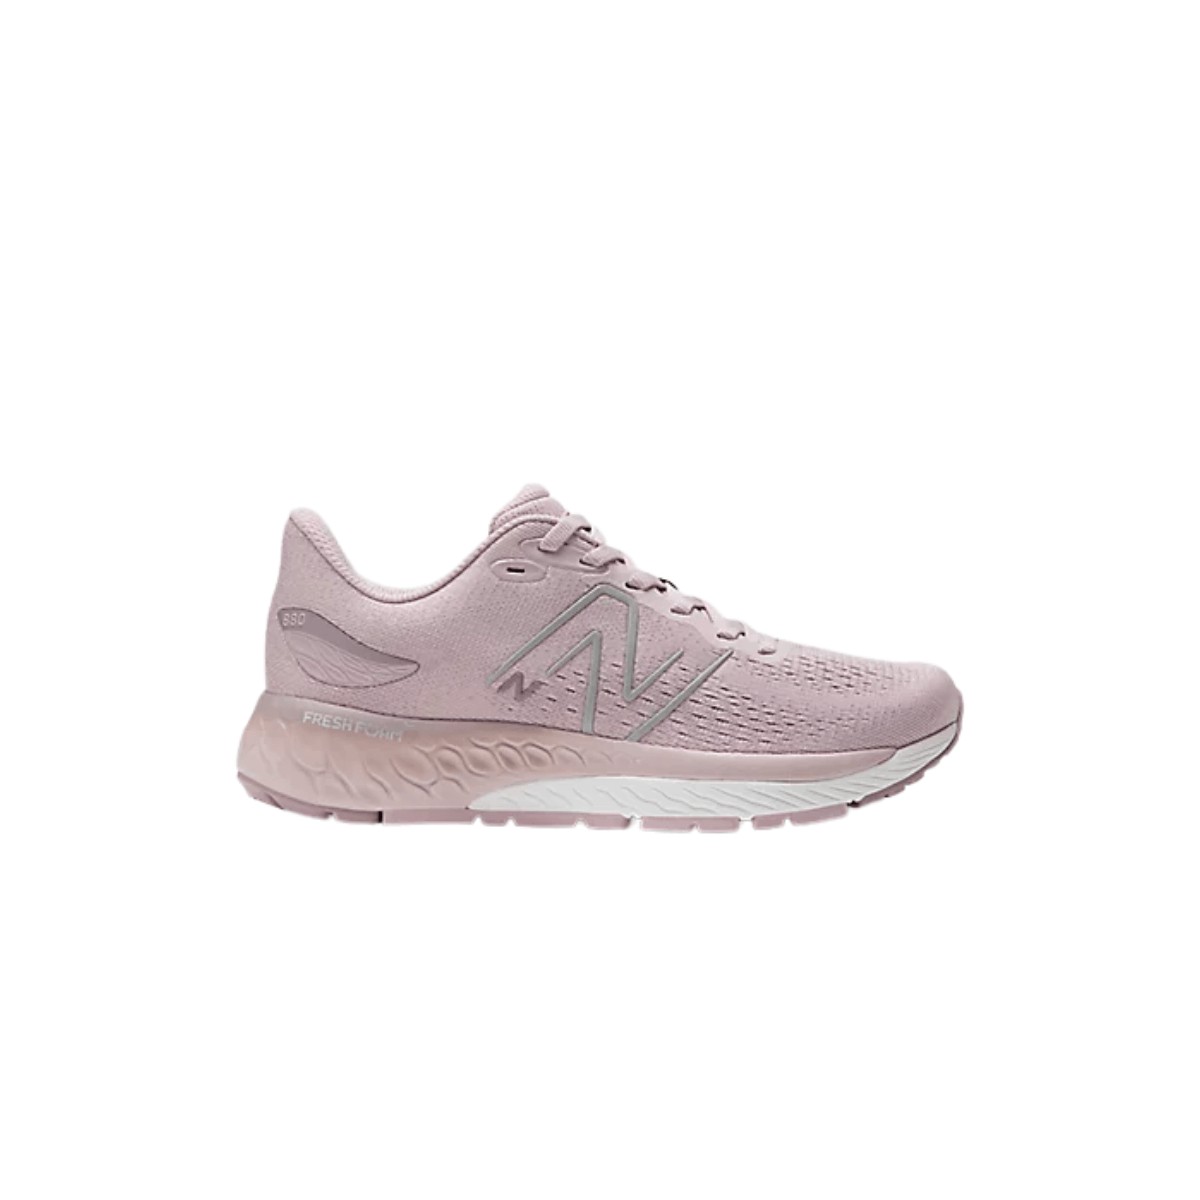 Chaussures New Balance Fresh Foam X 880 V12 Pourpre Blanc AW22 Femme, Taille 37 - EUR